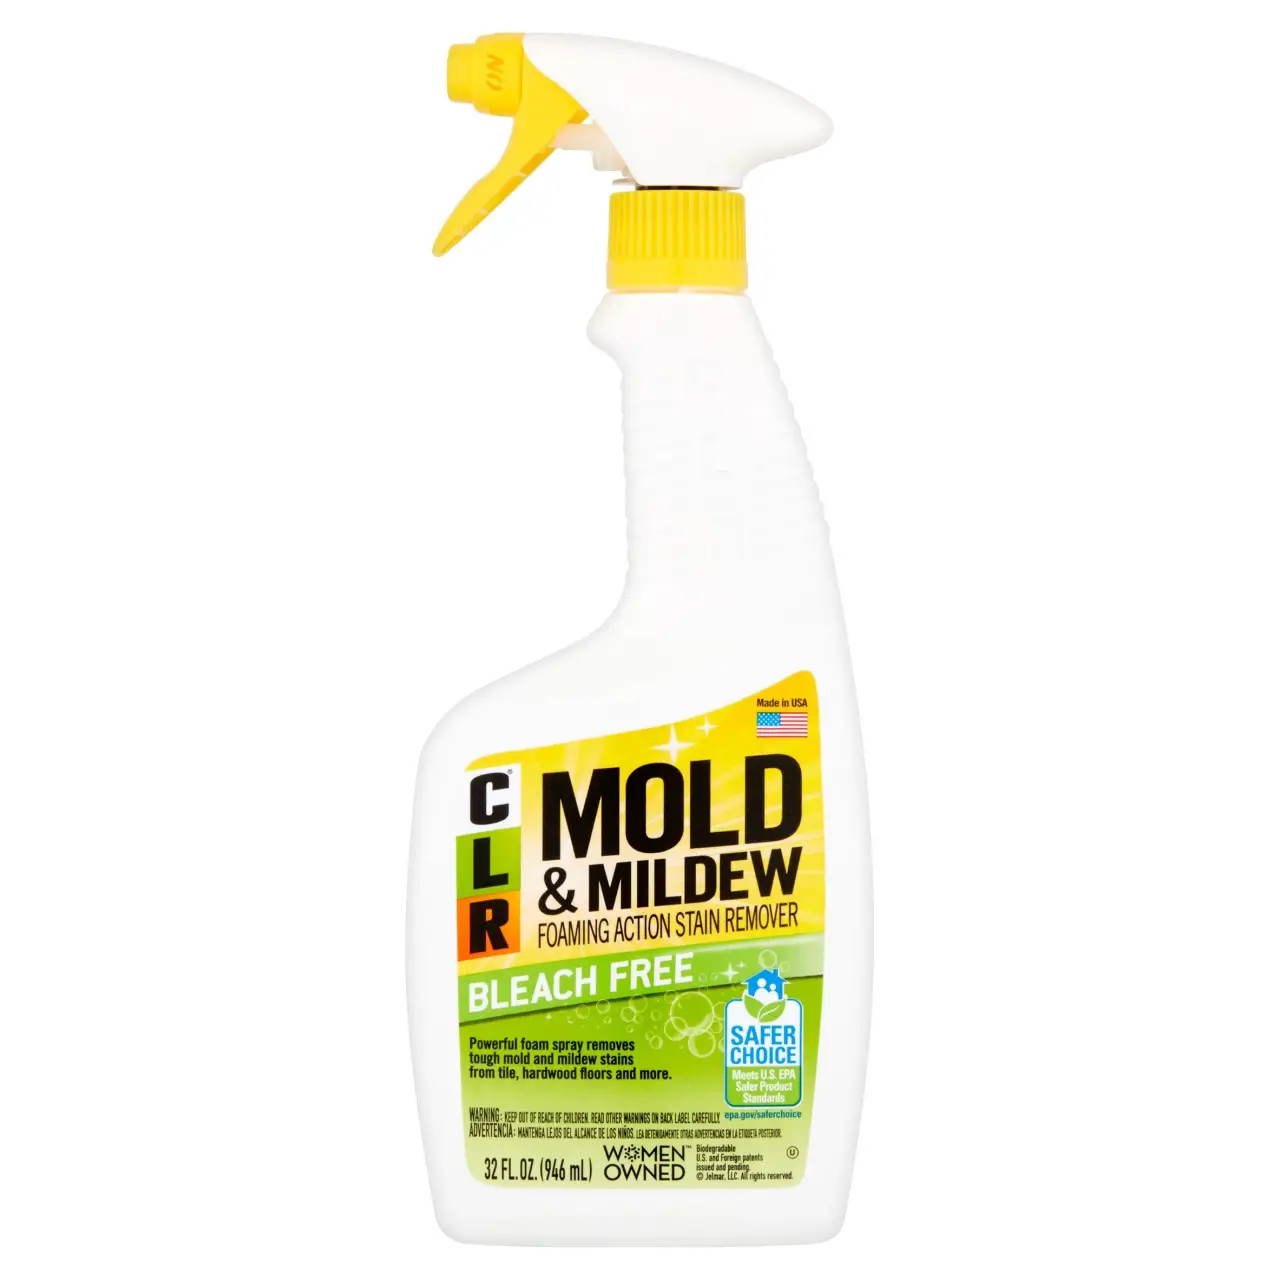 How To Remove Mold And Mildew From Boat Seats